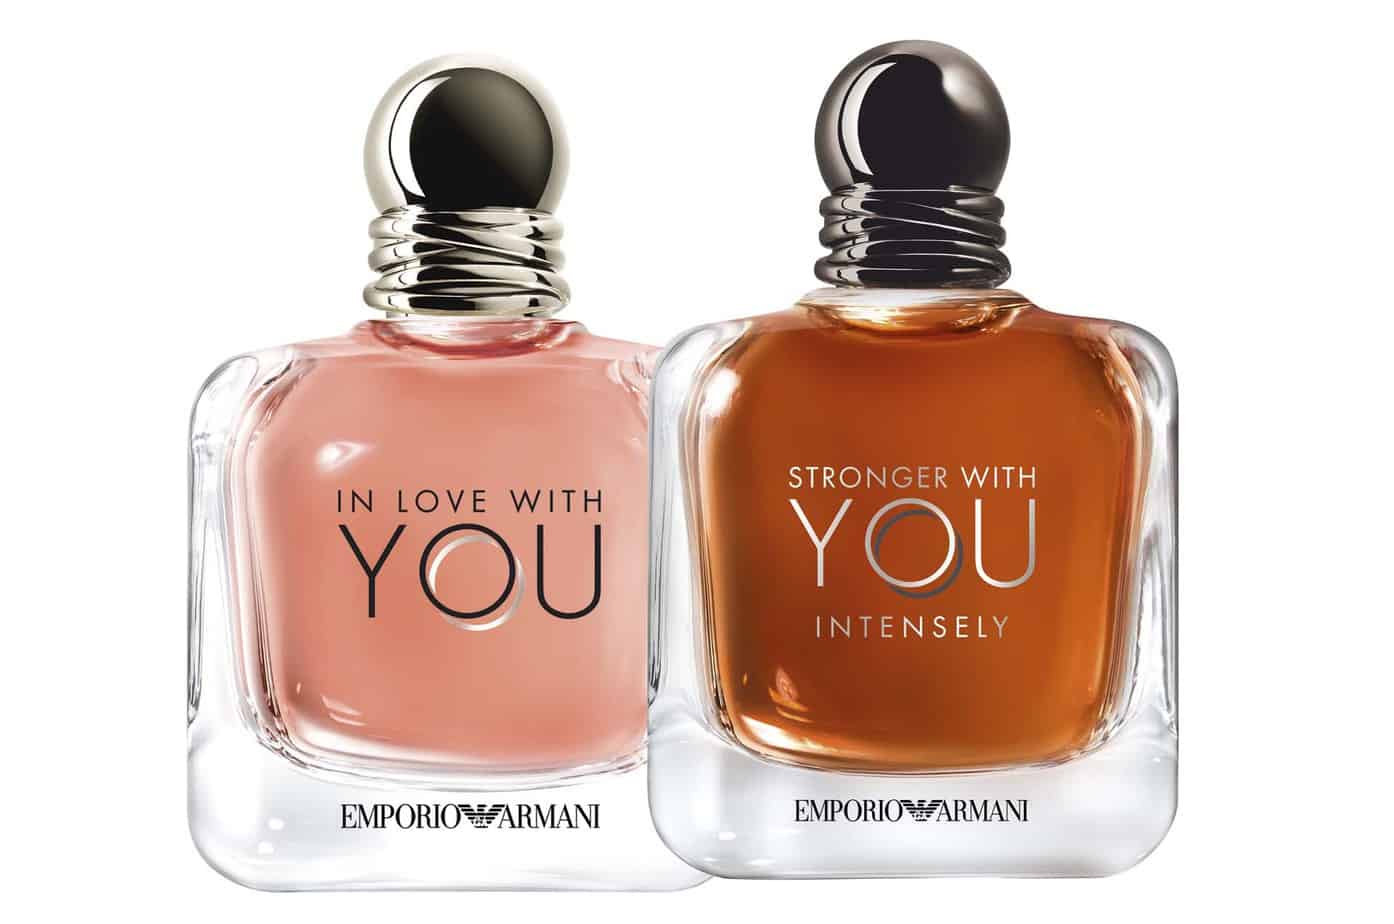 Stronger With You Intensely בושם לגבר. In Love With You בושם לאשה. Emporio Armani. צילום: יח״צ חו״ל